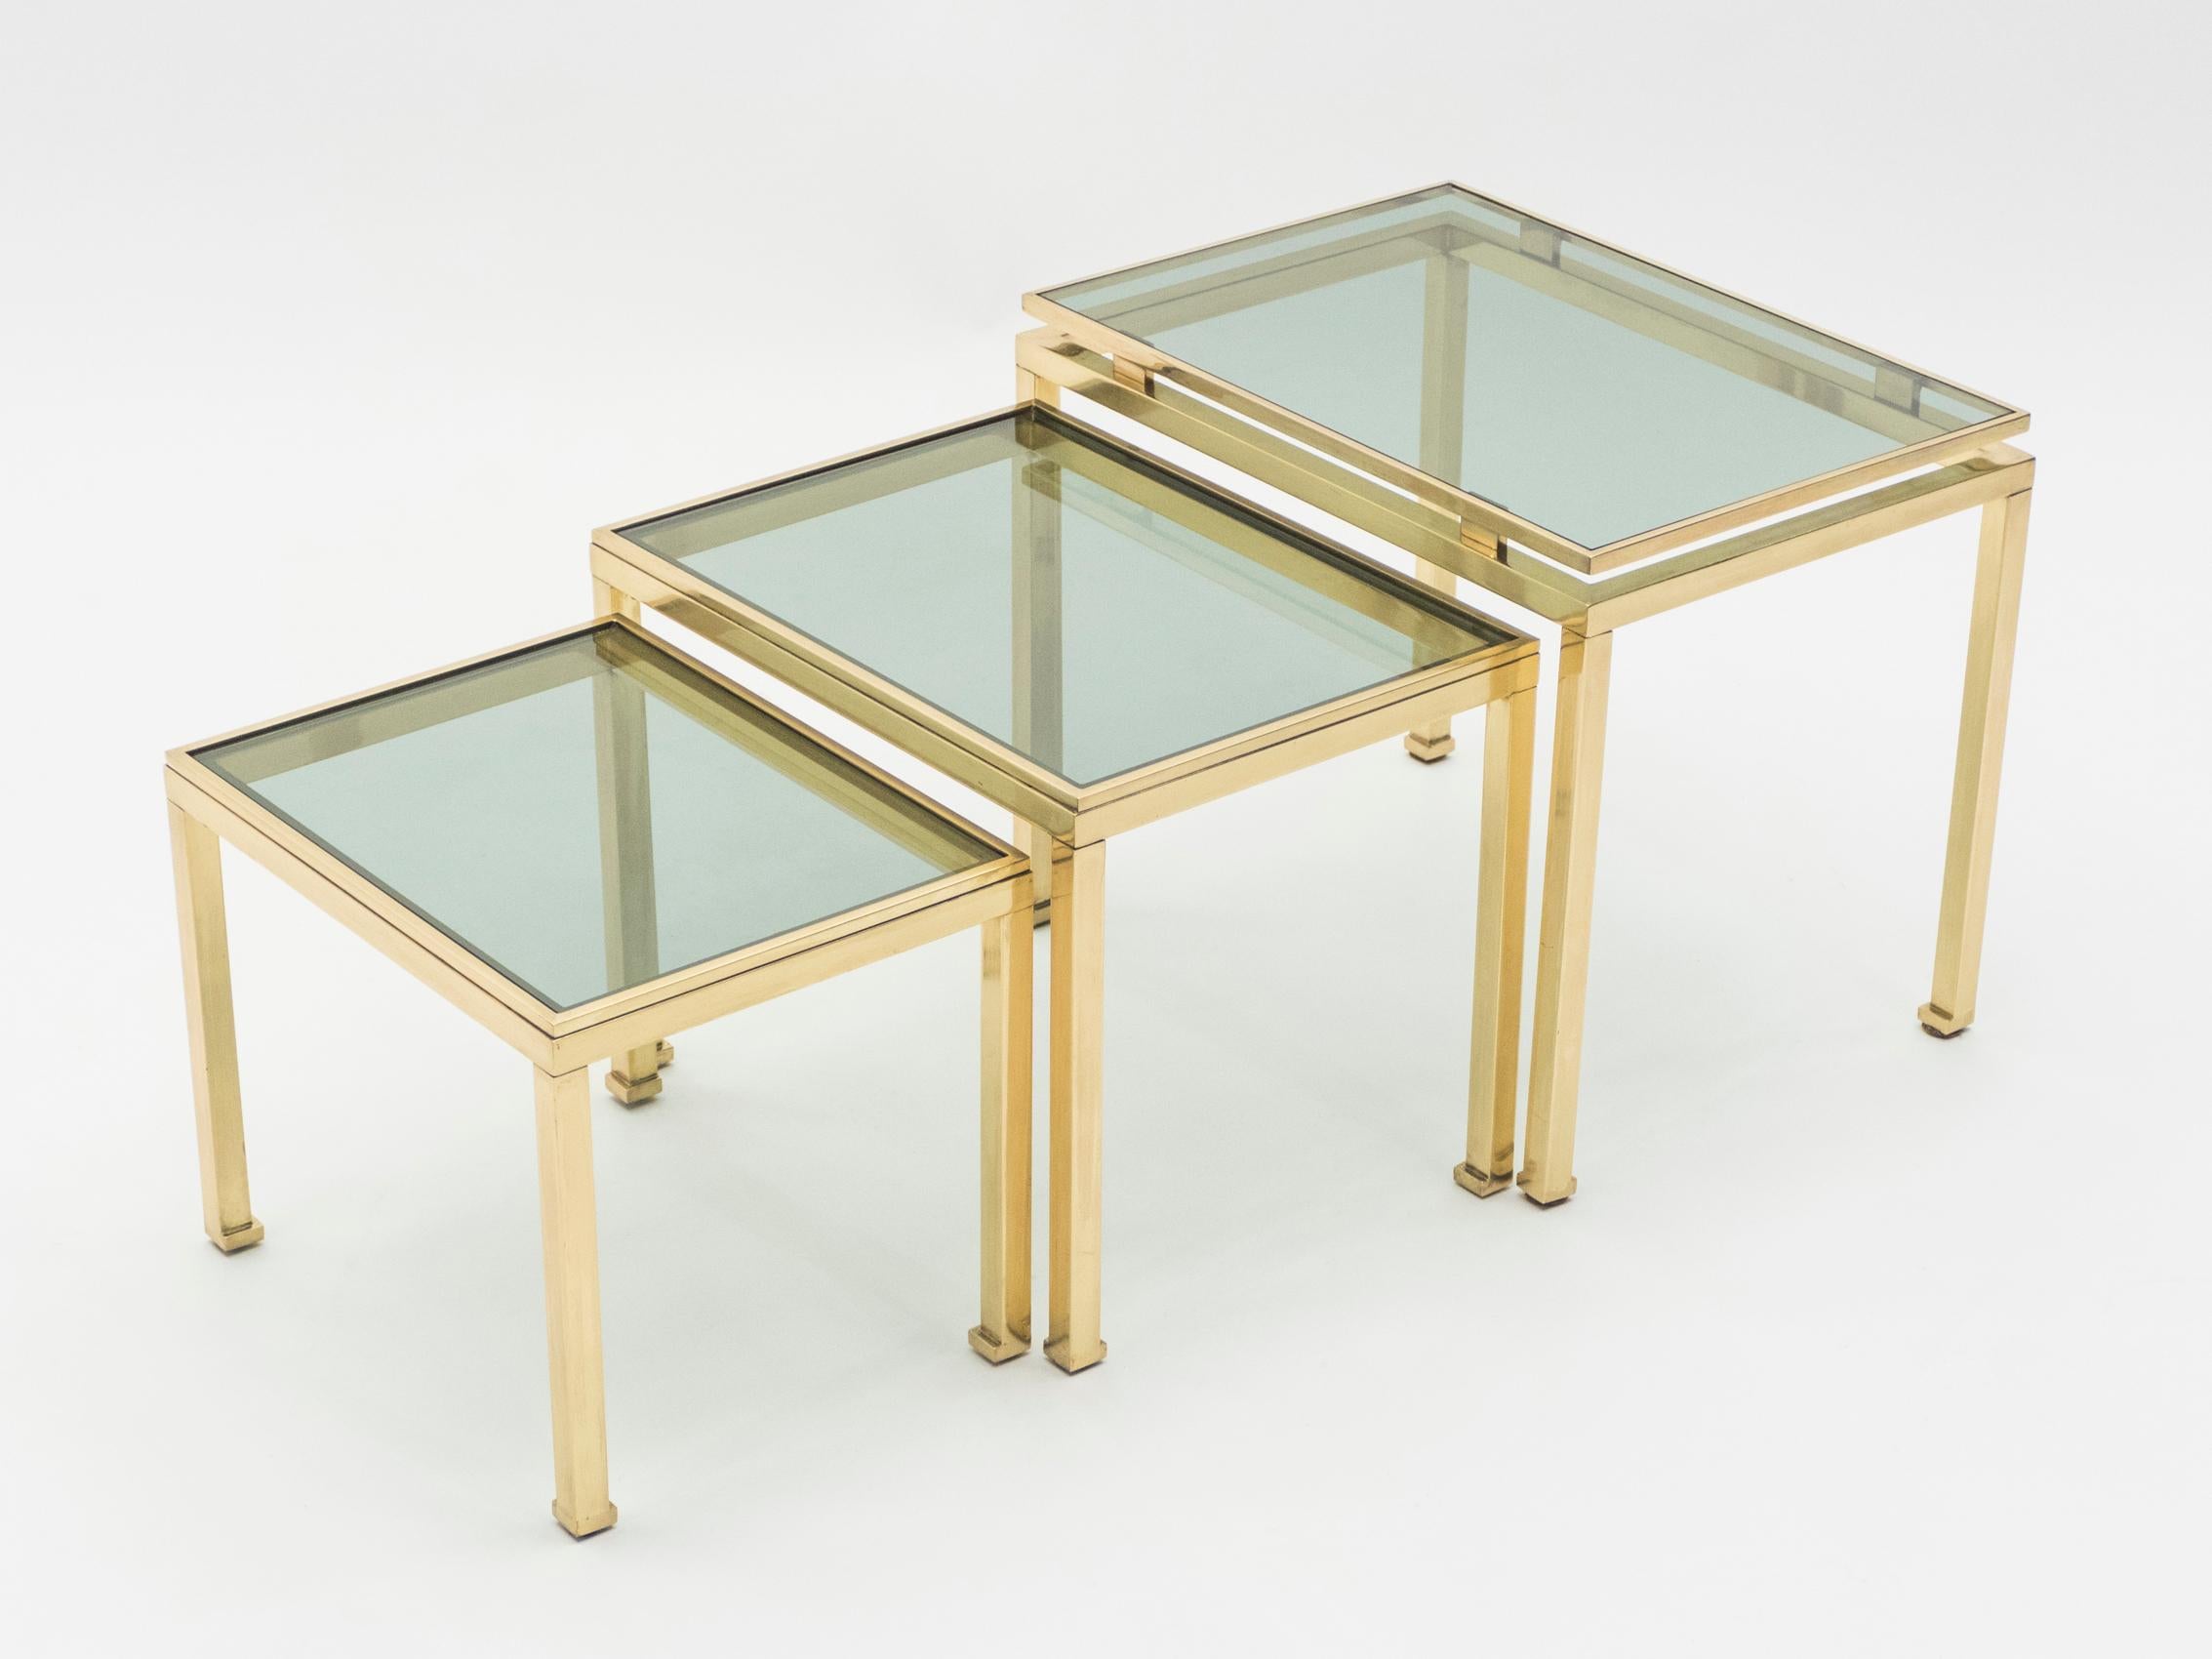 Simple lines point to this nesting tables midcentury roots. Designed by Guy Lefevre for Maison Jansen, it features silky brass legs and green smoked glass tops. Its symmetry, elevated glass, and strong architectural design combine to create a subtle